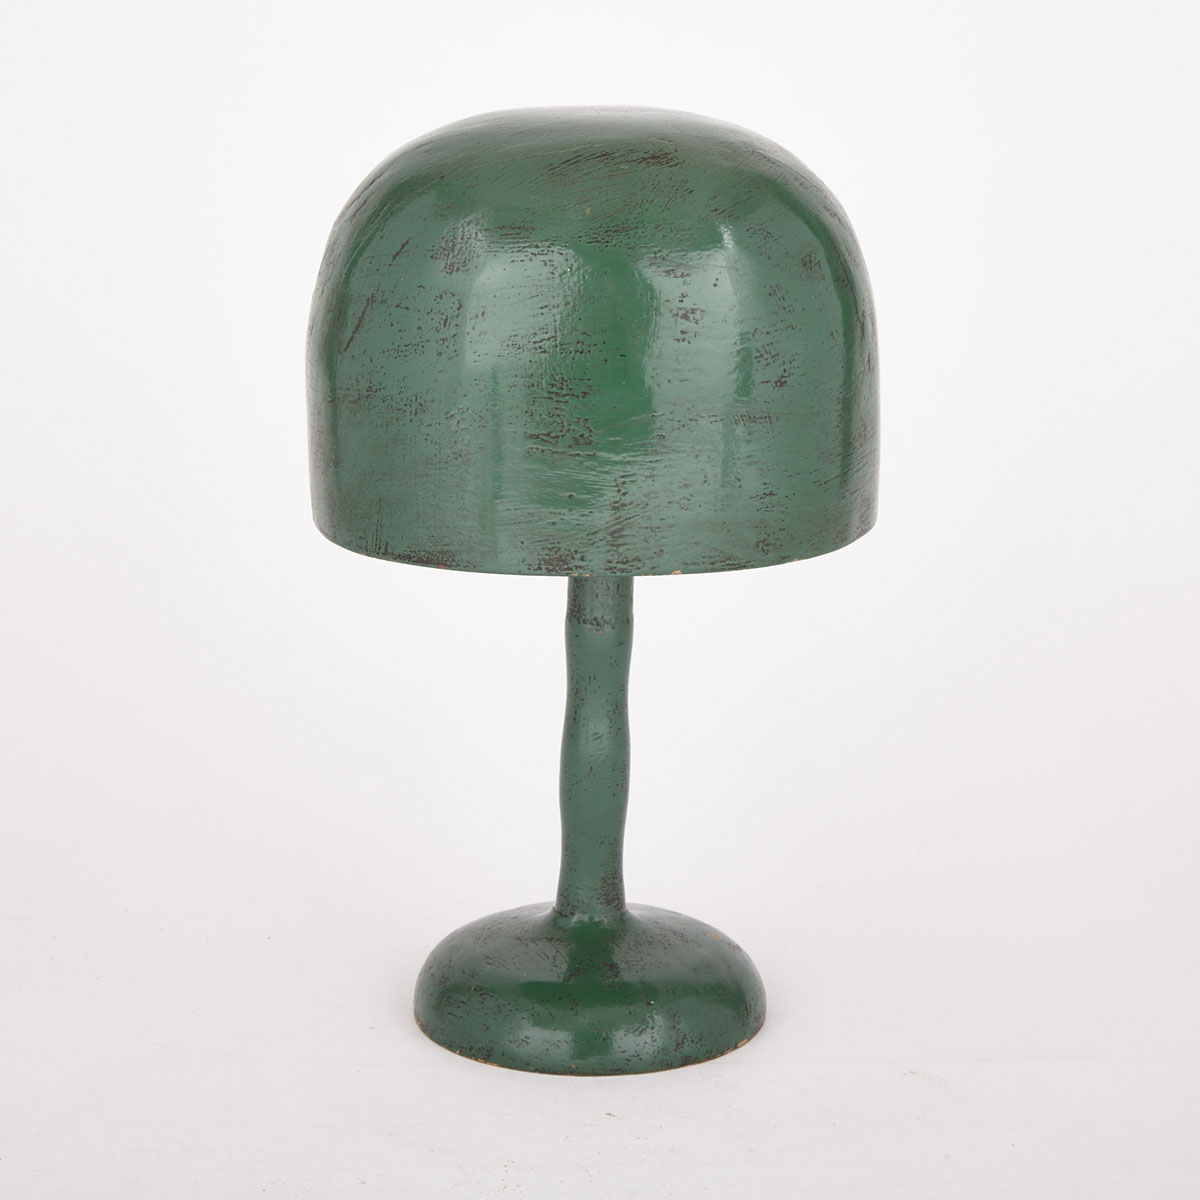 Milliner’s Green Lacquered Hat Block on Stand, 19th century